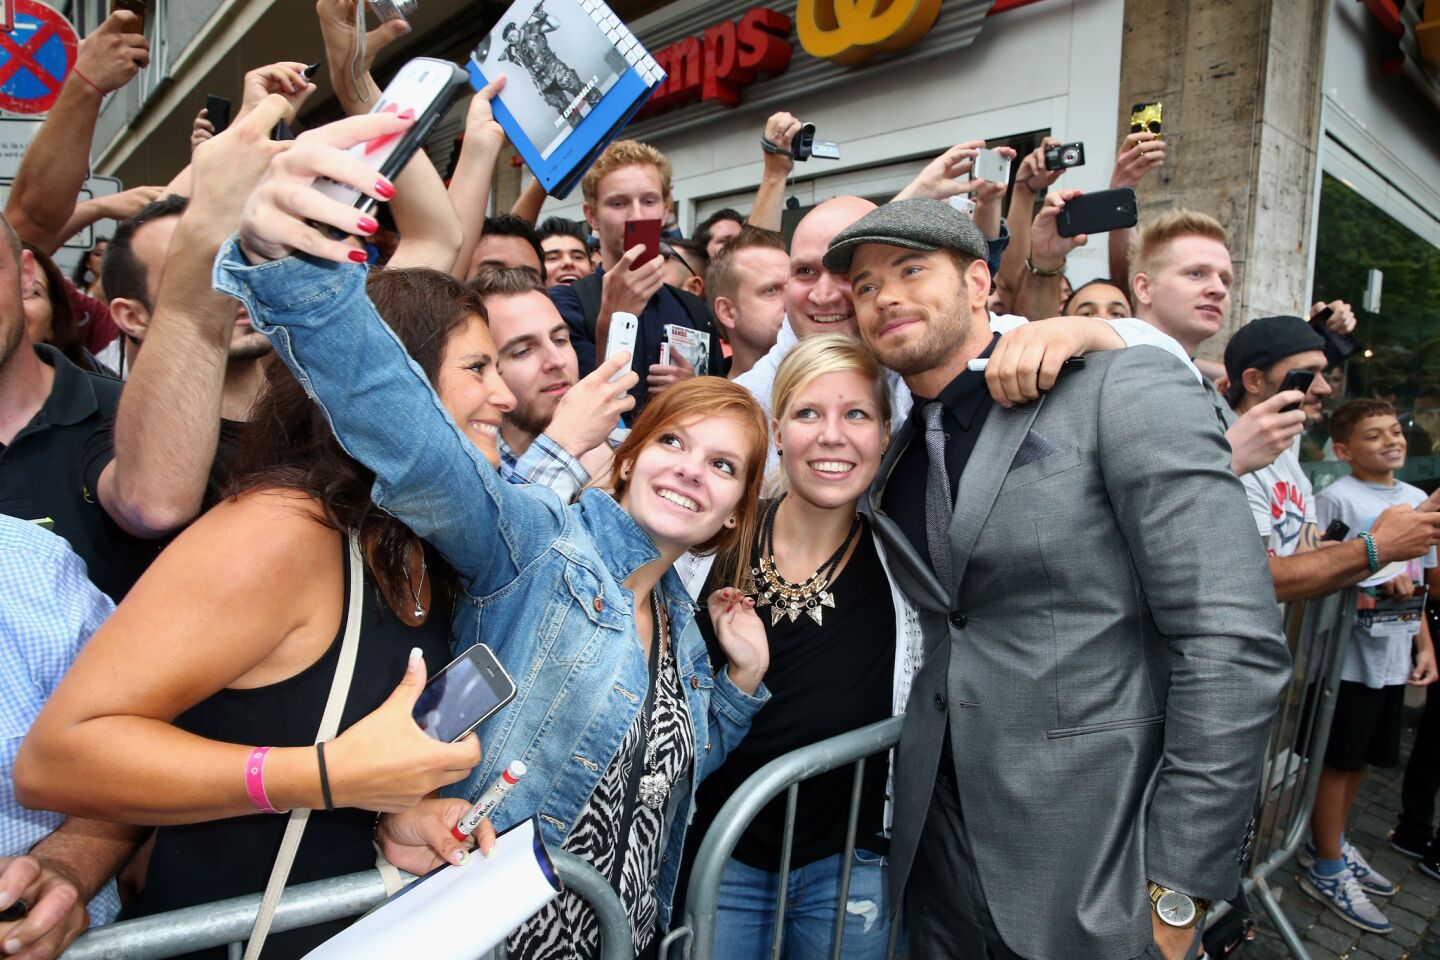 Kellan Lutz gets into the fan shot at the premiere of "The Expendables 3" in Cologne, Germany.